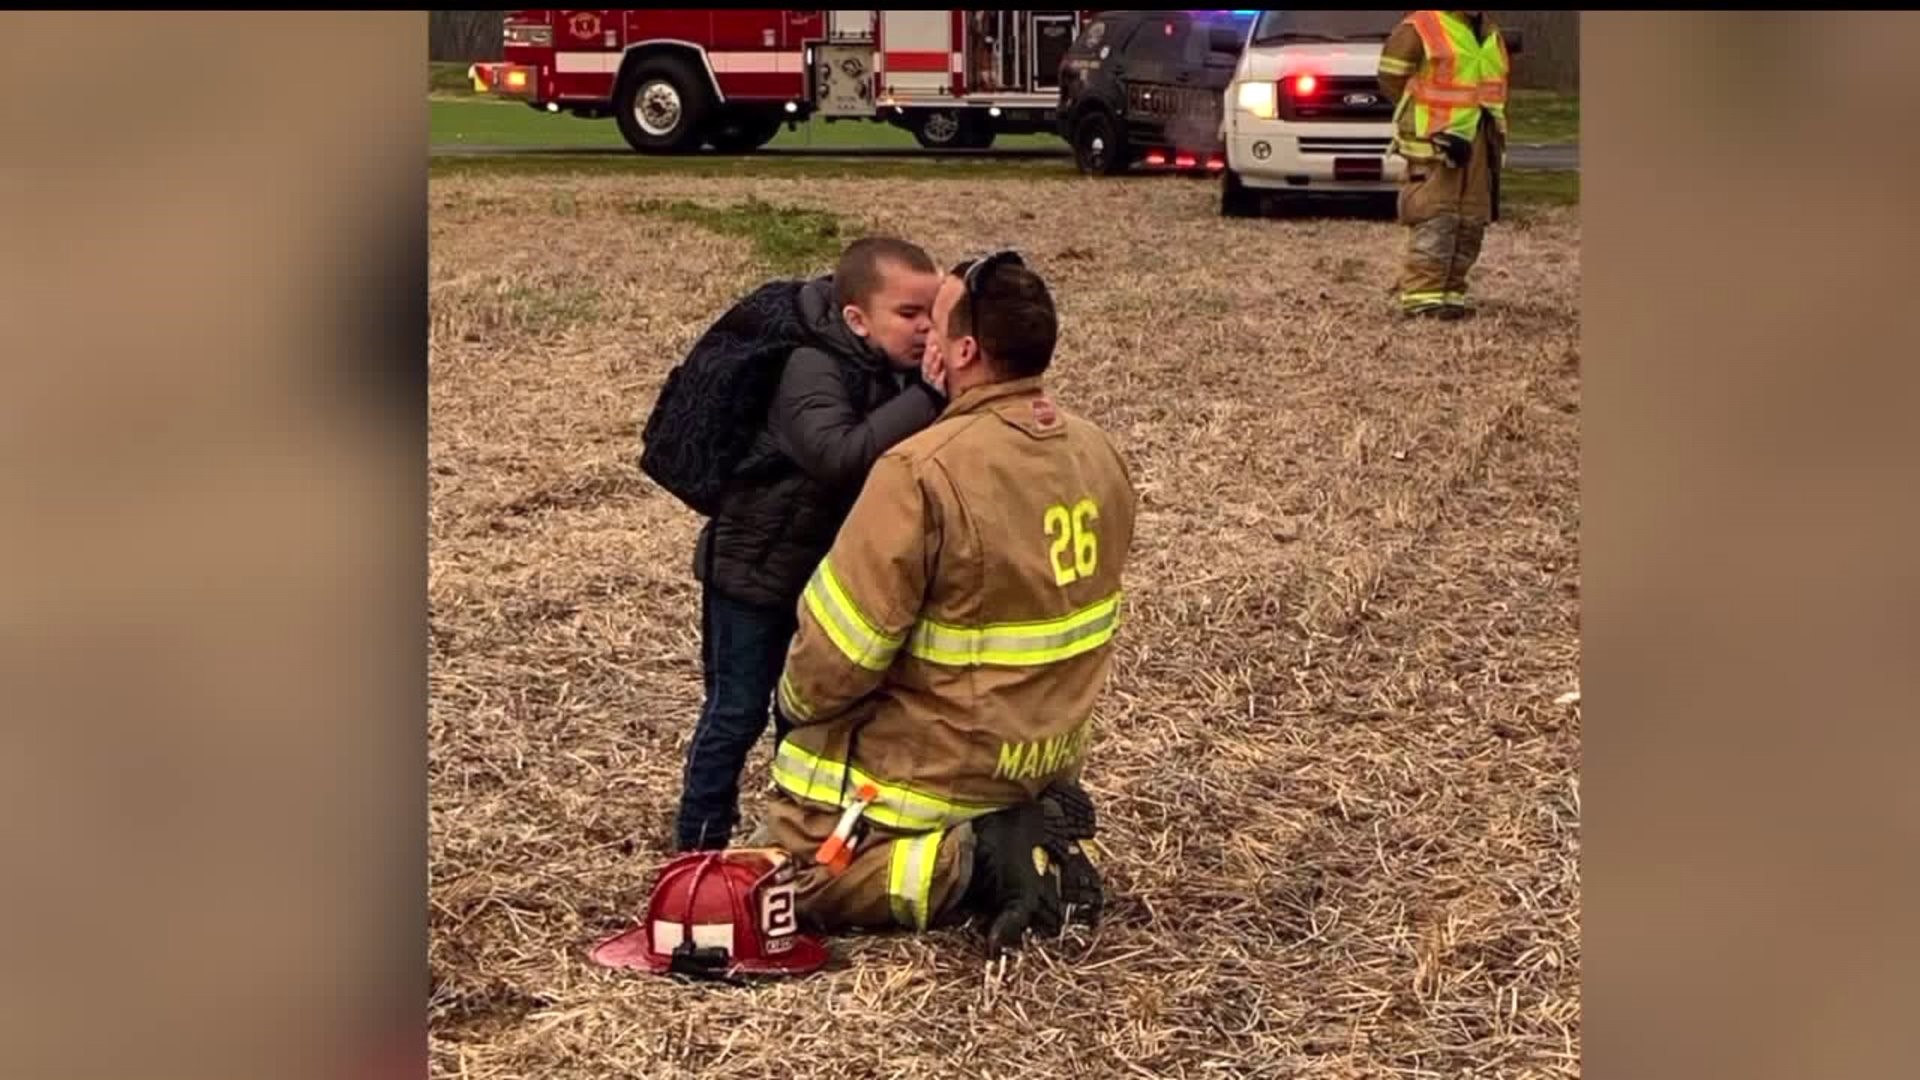 Lancaster County firefighter is reunited with the boy with autism he helped soothe after bus crash